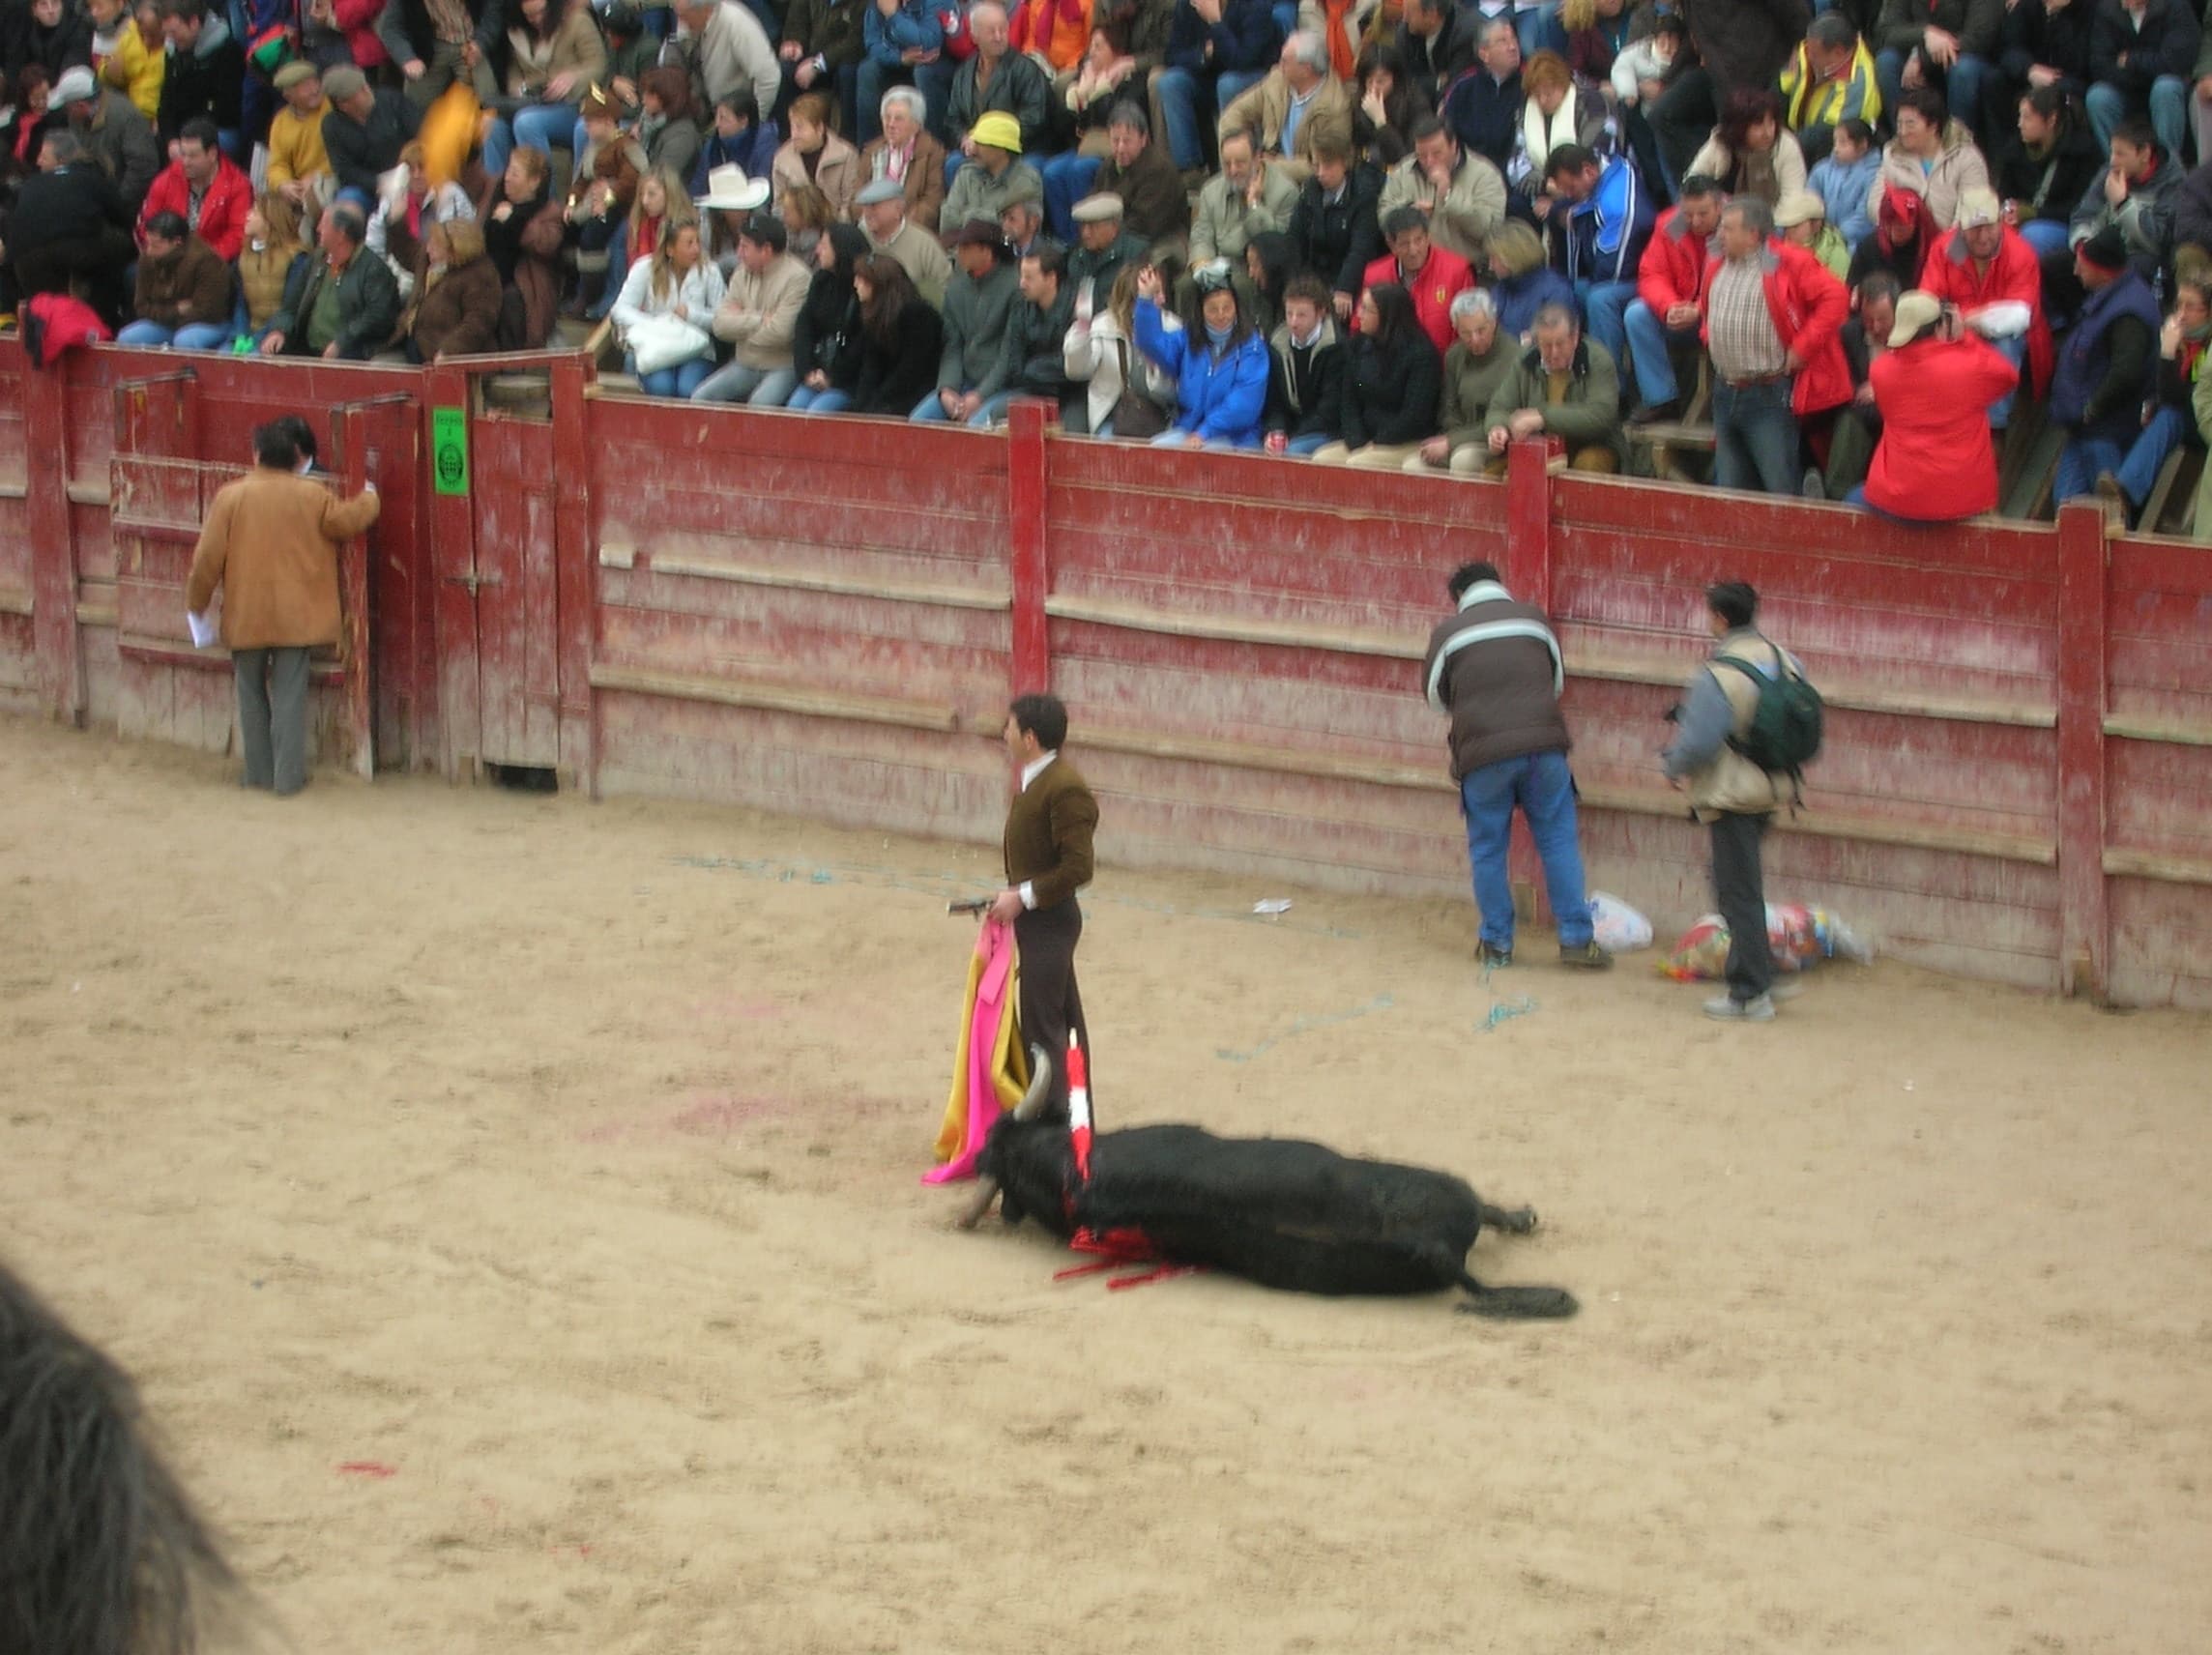 Once the bull is too weak to offer the matador a challenge, a final, fatal blow is delivered